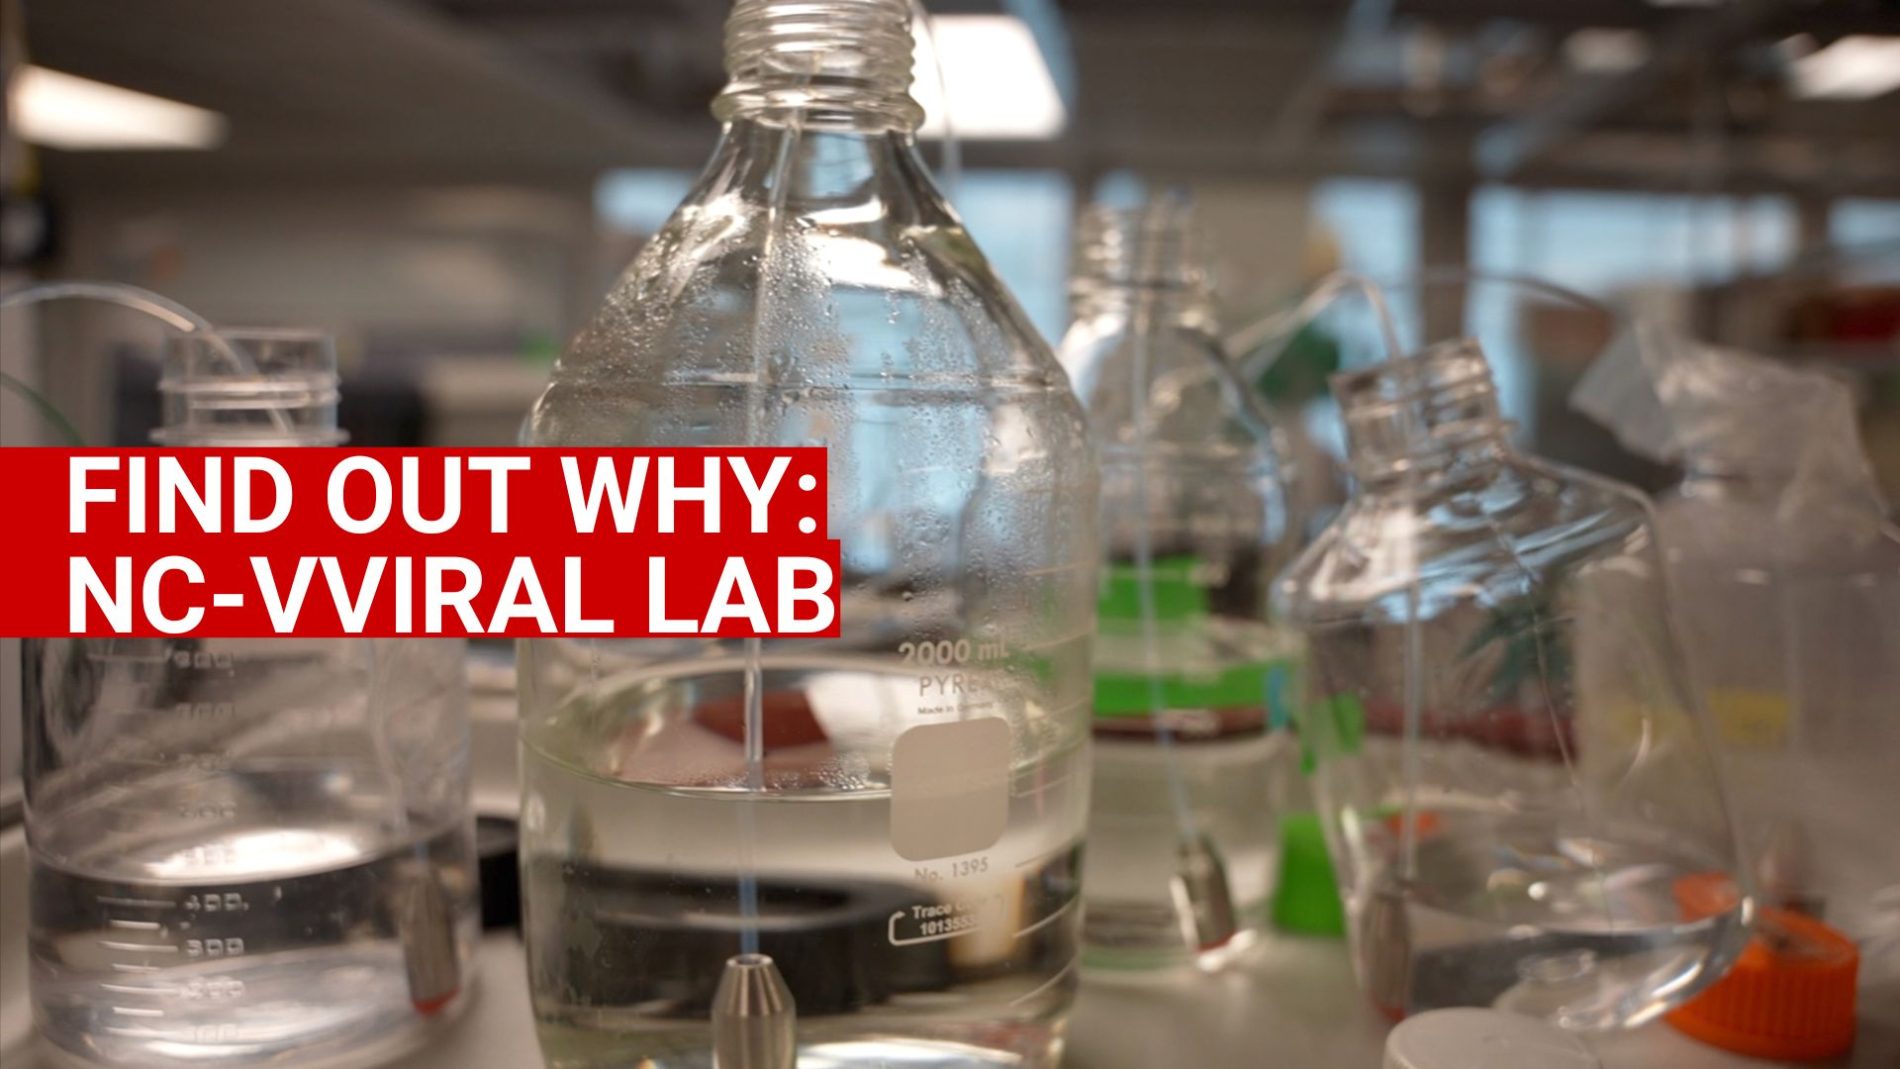 VVIRAL lab header image showing a closeup image of beakers and clear glass laboratory containers.